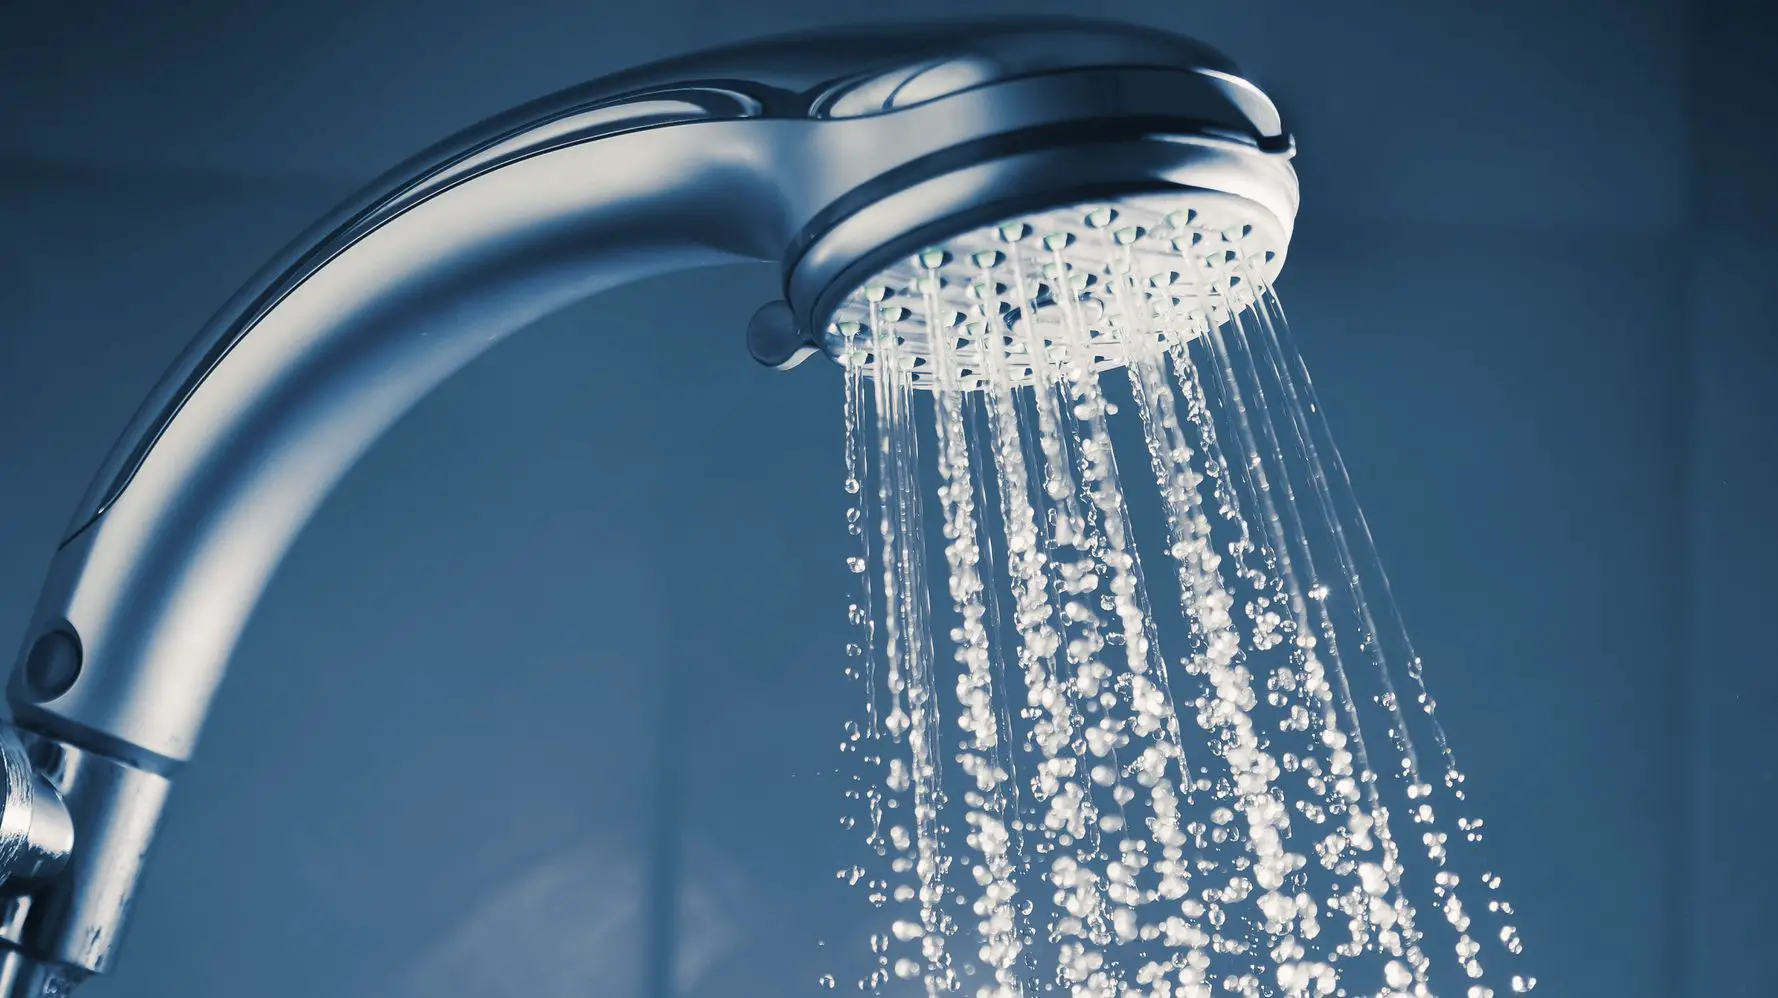 Facts About the Best Shower Water Filter